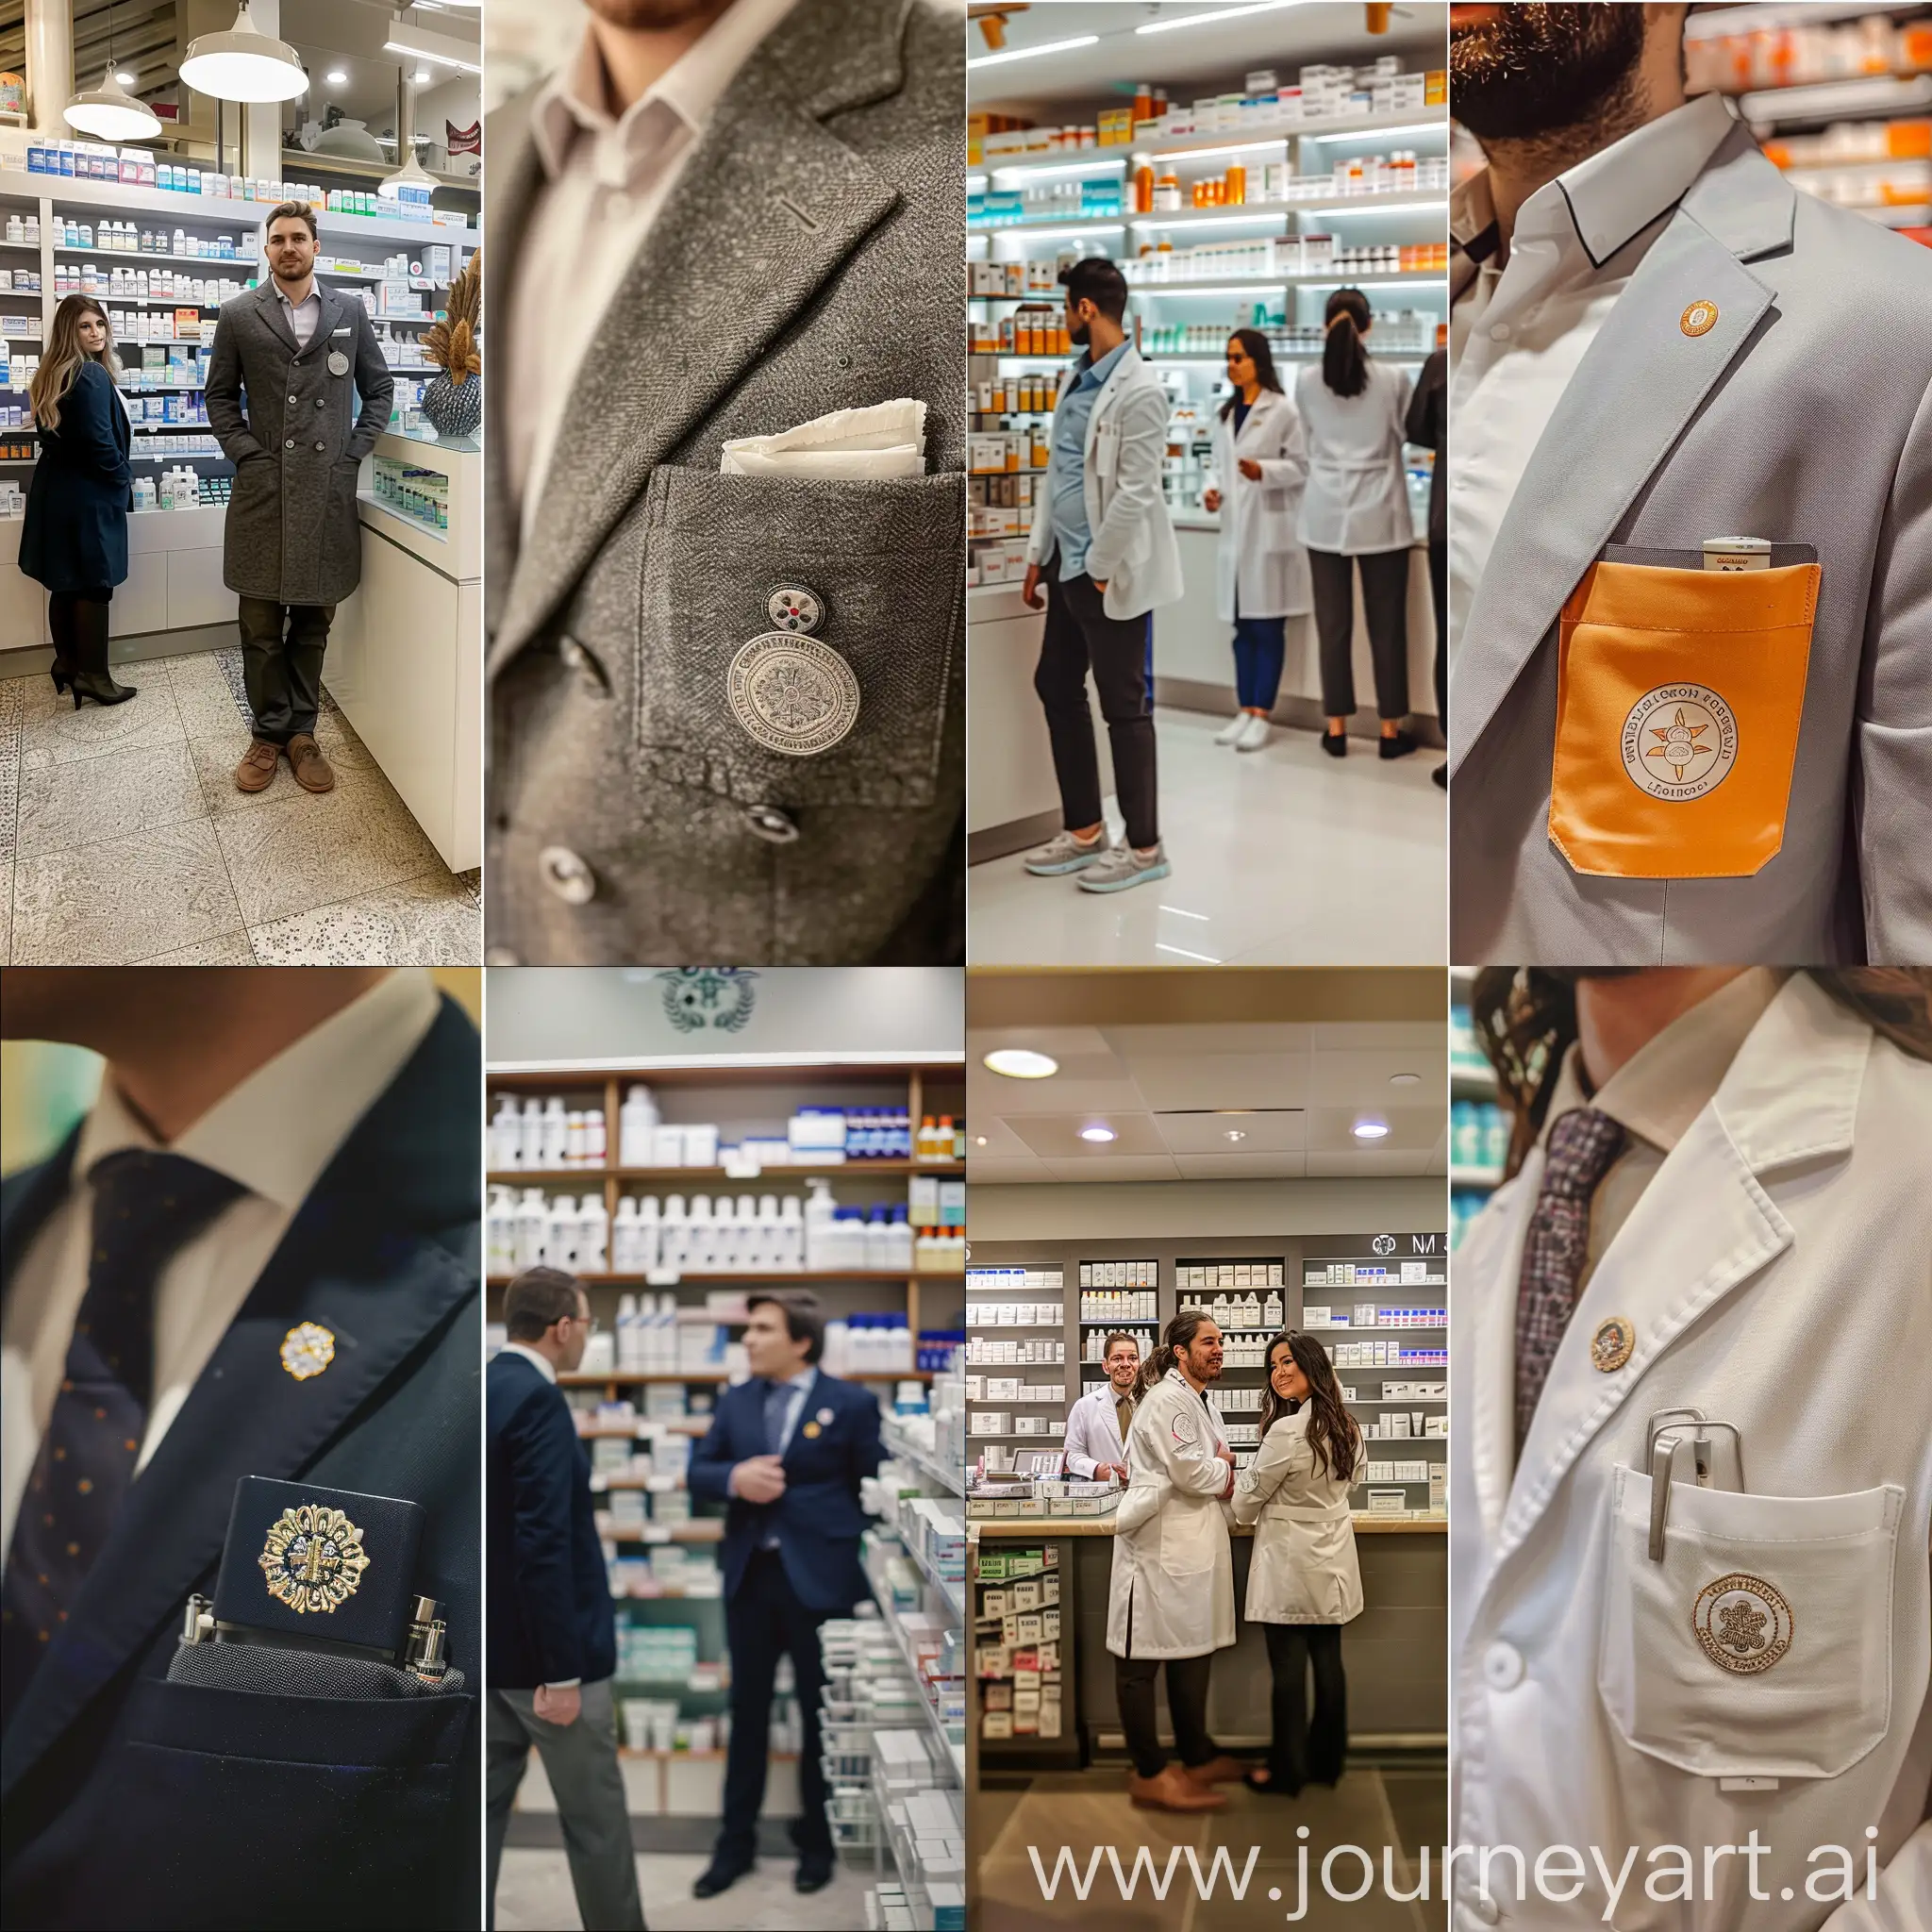 a picture of the inside of the pharmacy with staff, the logo on the coat pocket should be the picture I added